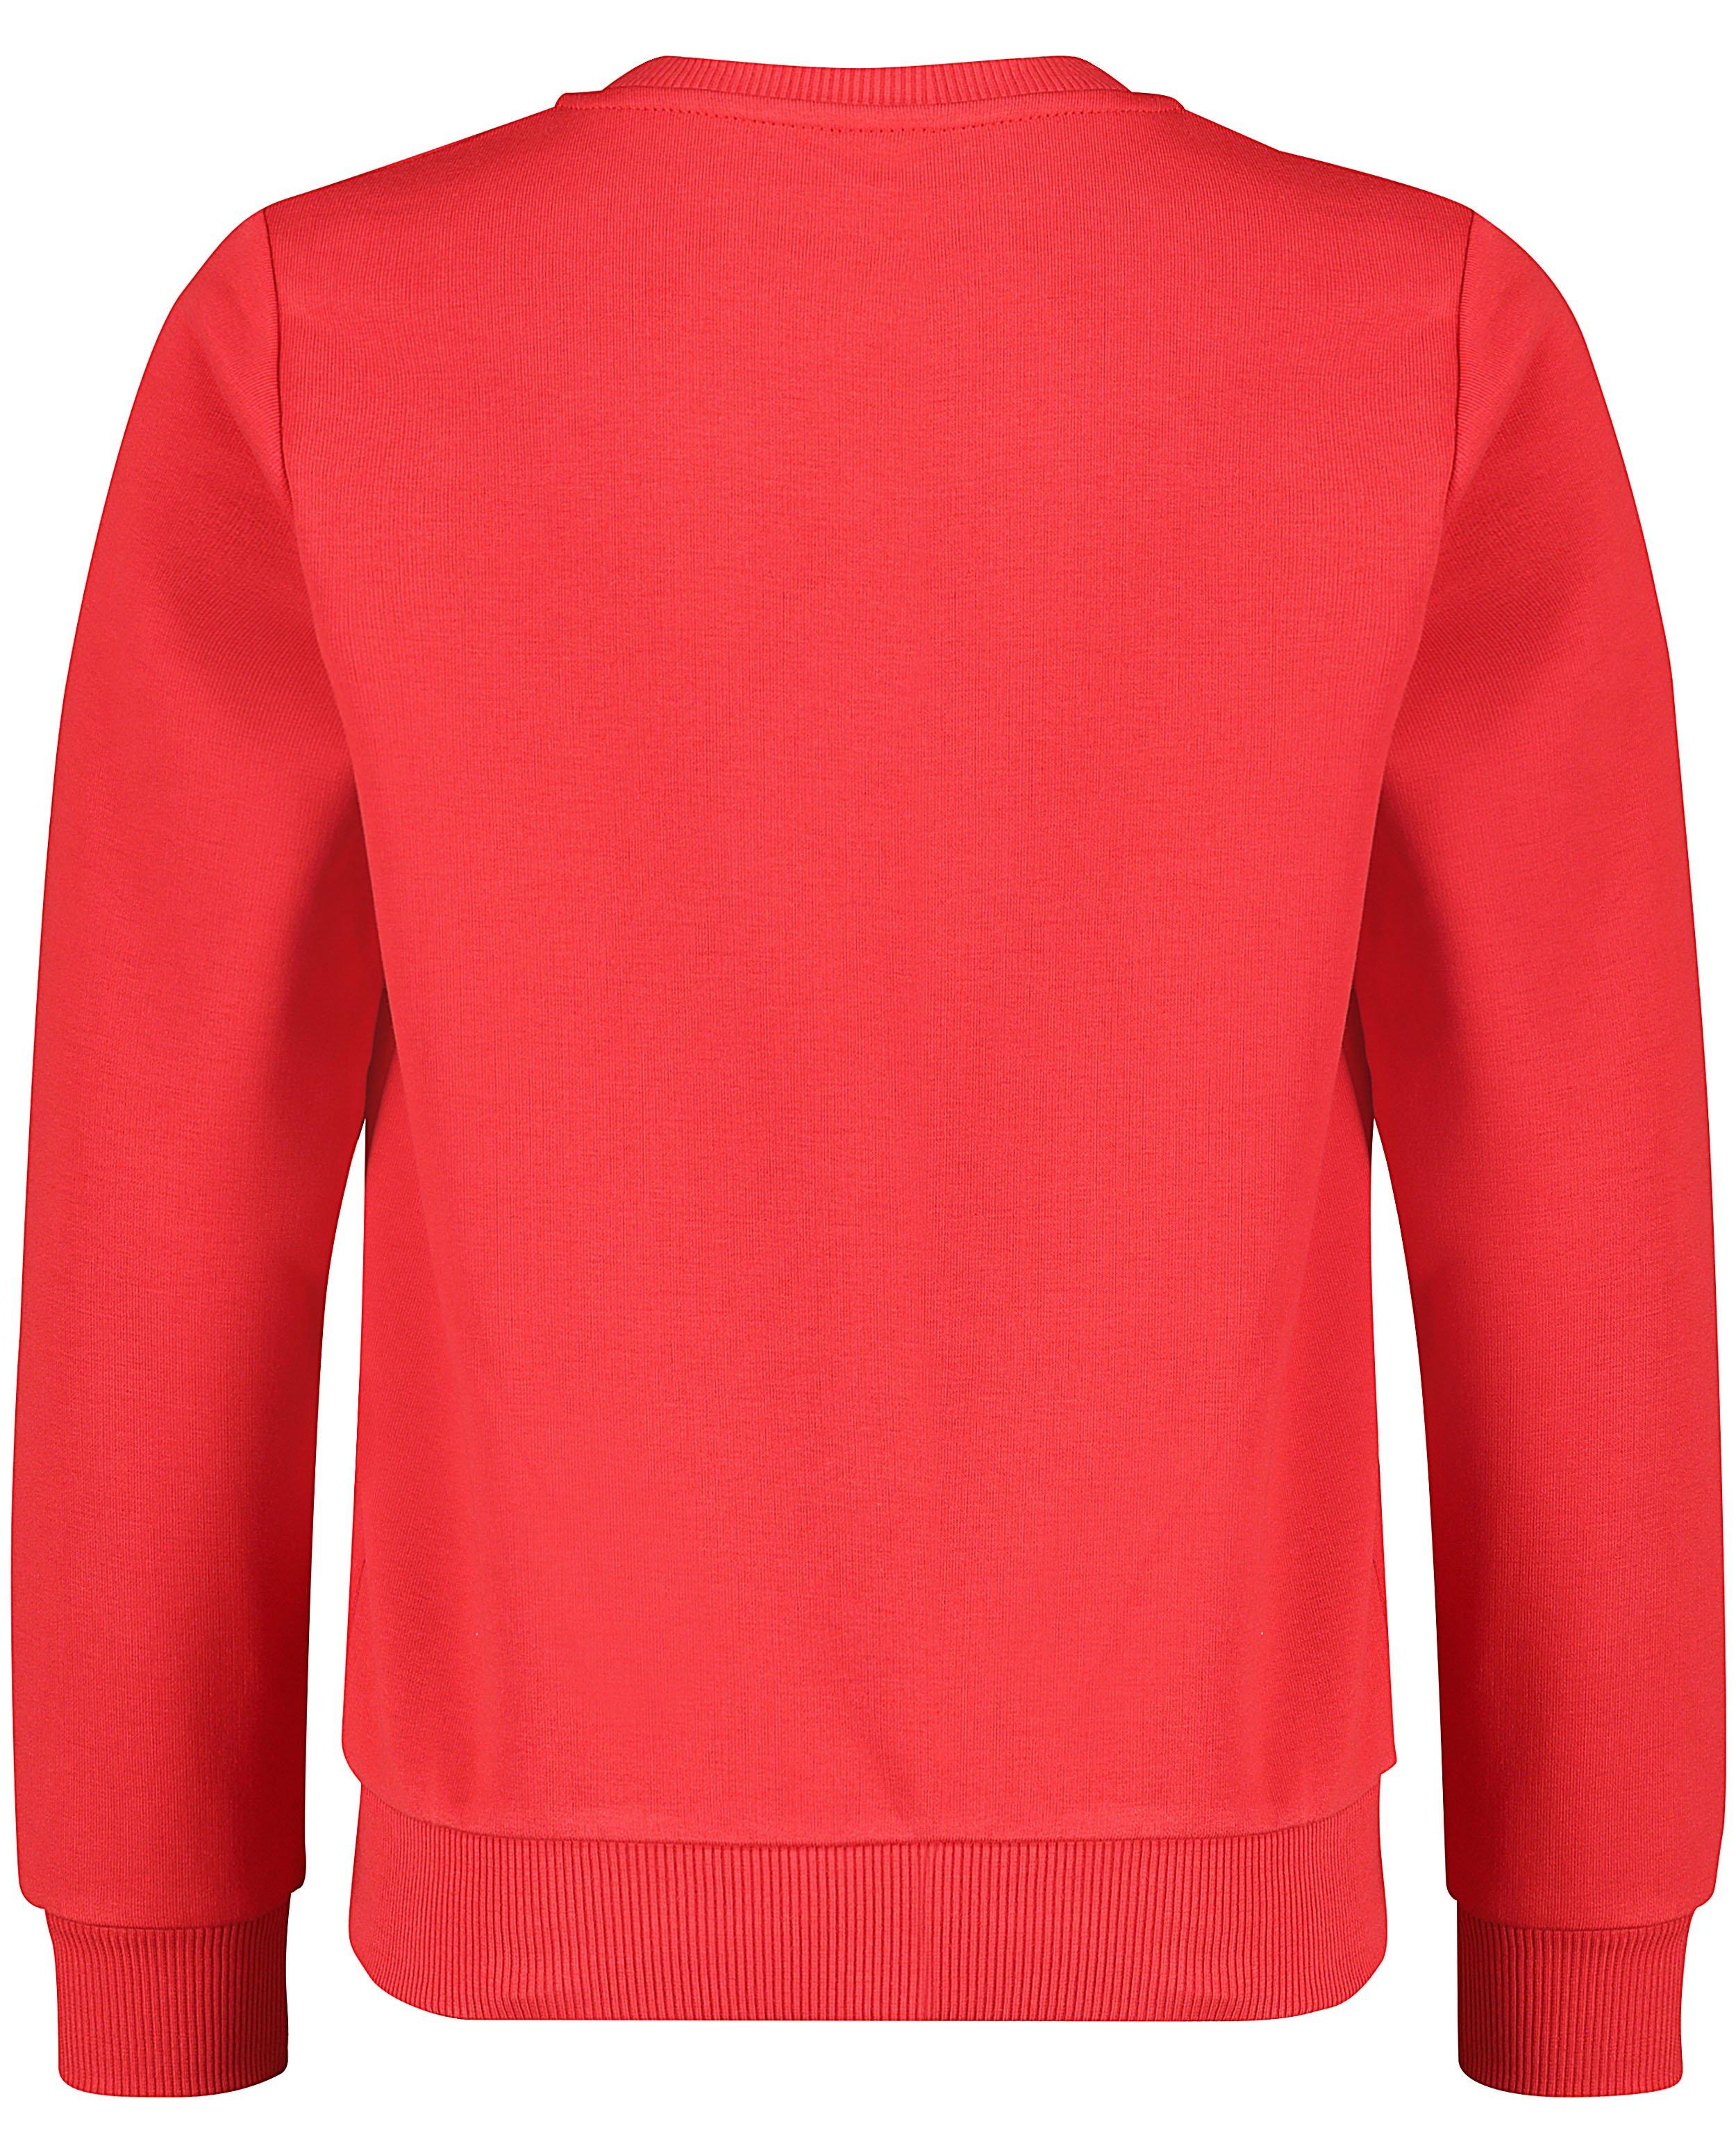 Sweaters - Rode sweater met opschrift #LikeMe